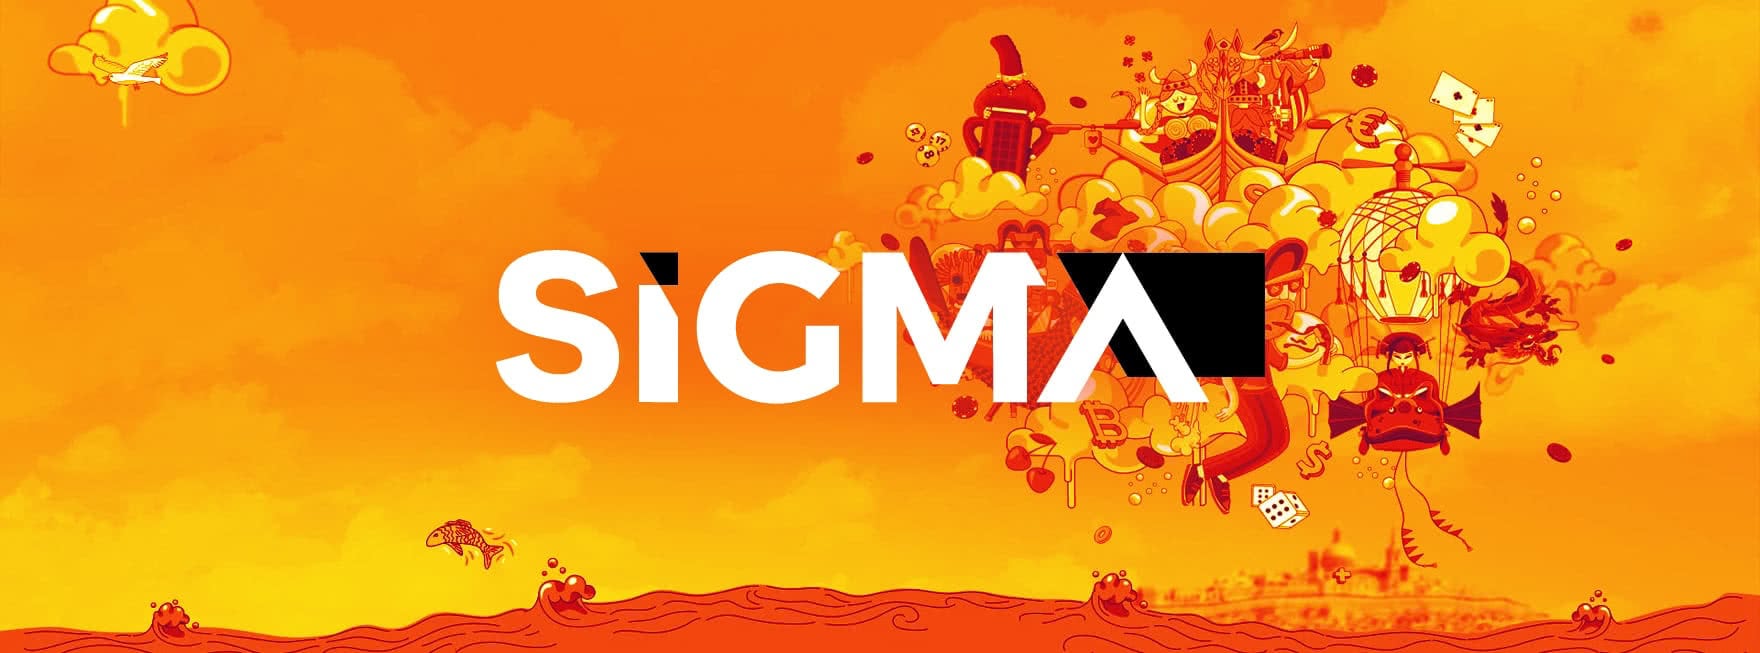 TrafficLab News - Sigma 19: At the Heart of iGaming